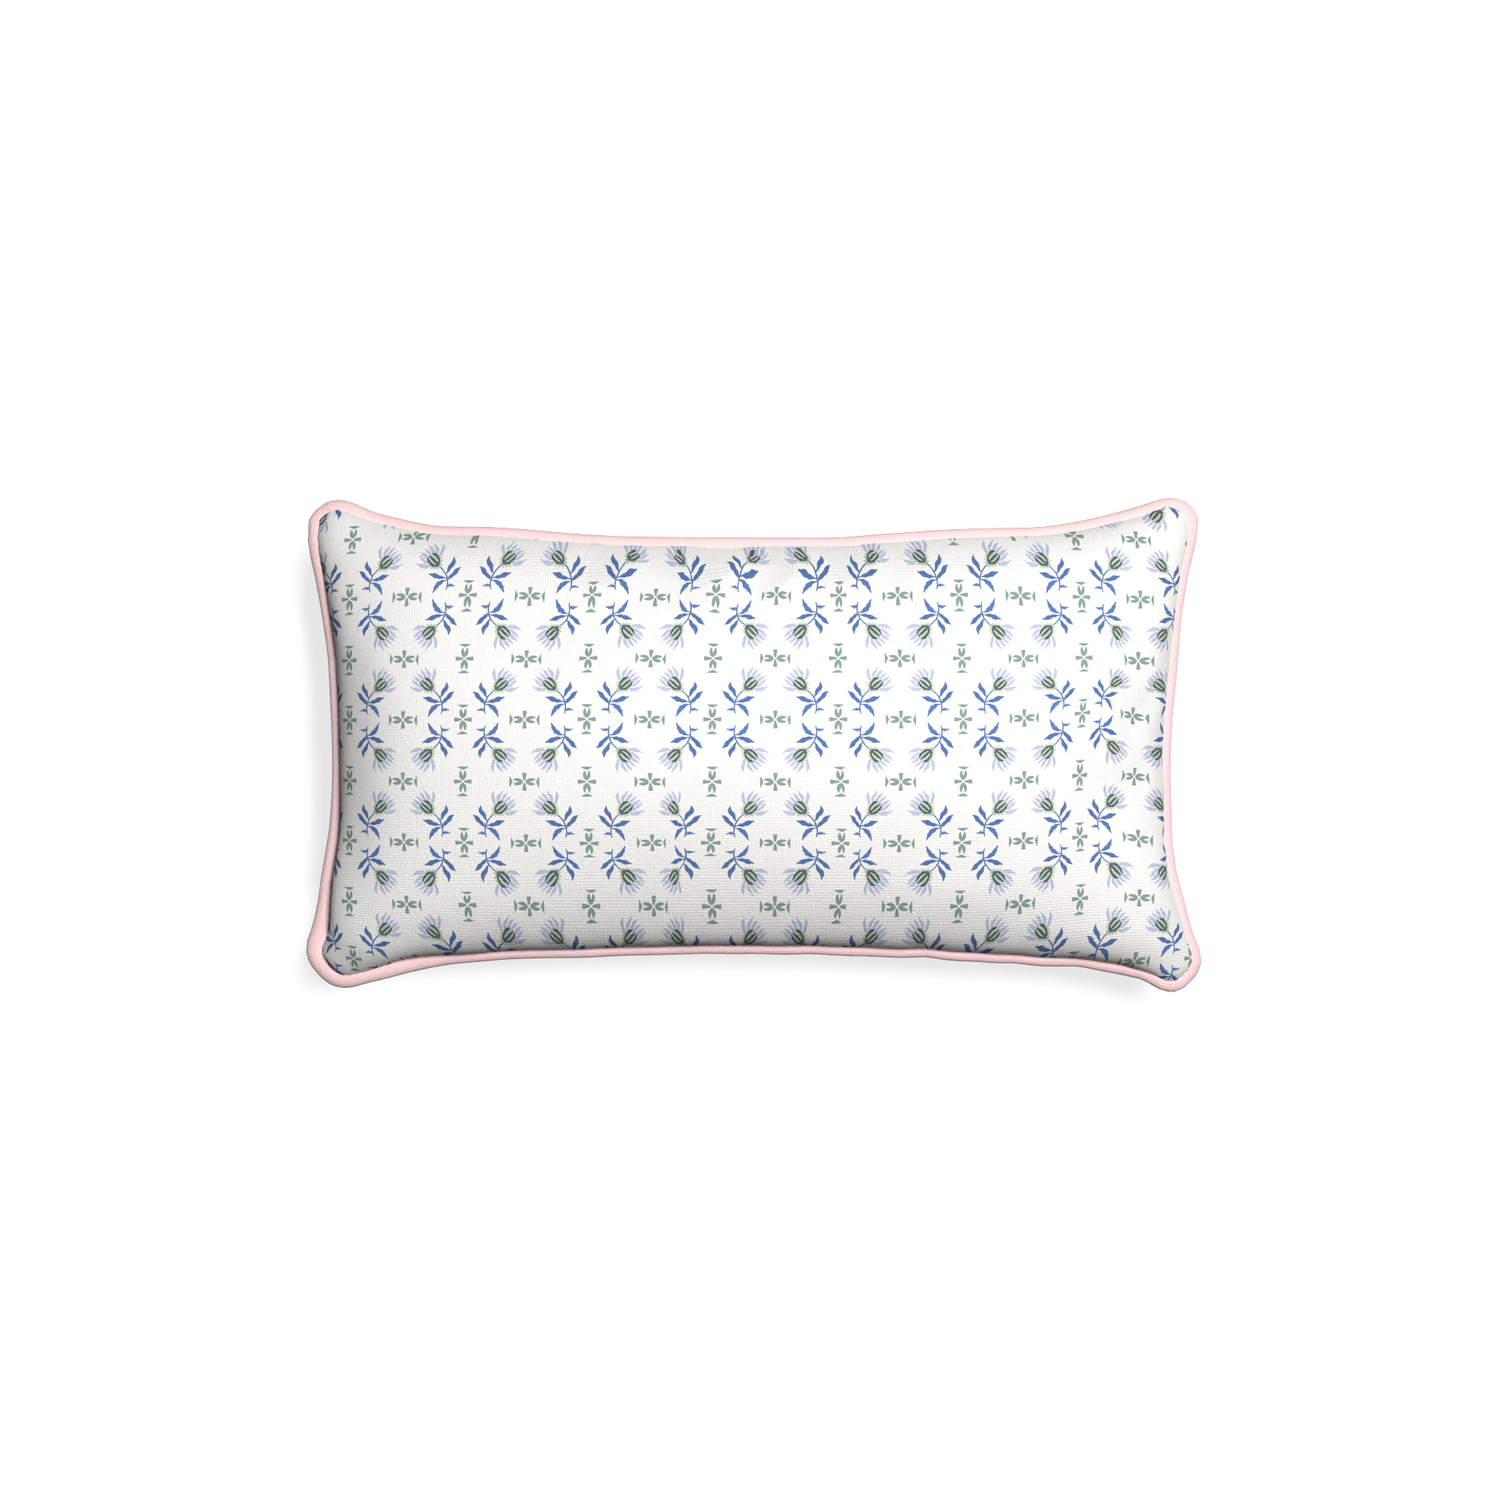 Petite-lumbar lee custom blue & green floralpillow with petal piping on white background